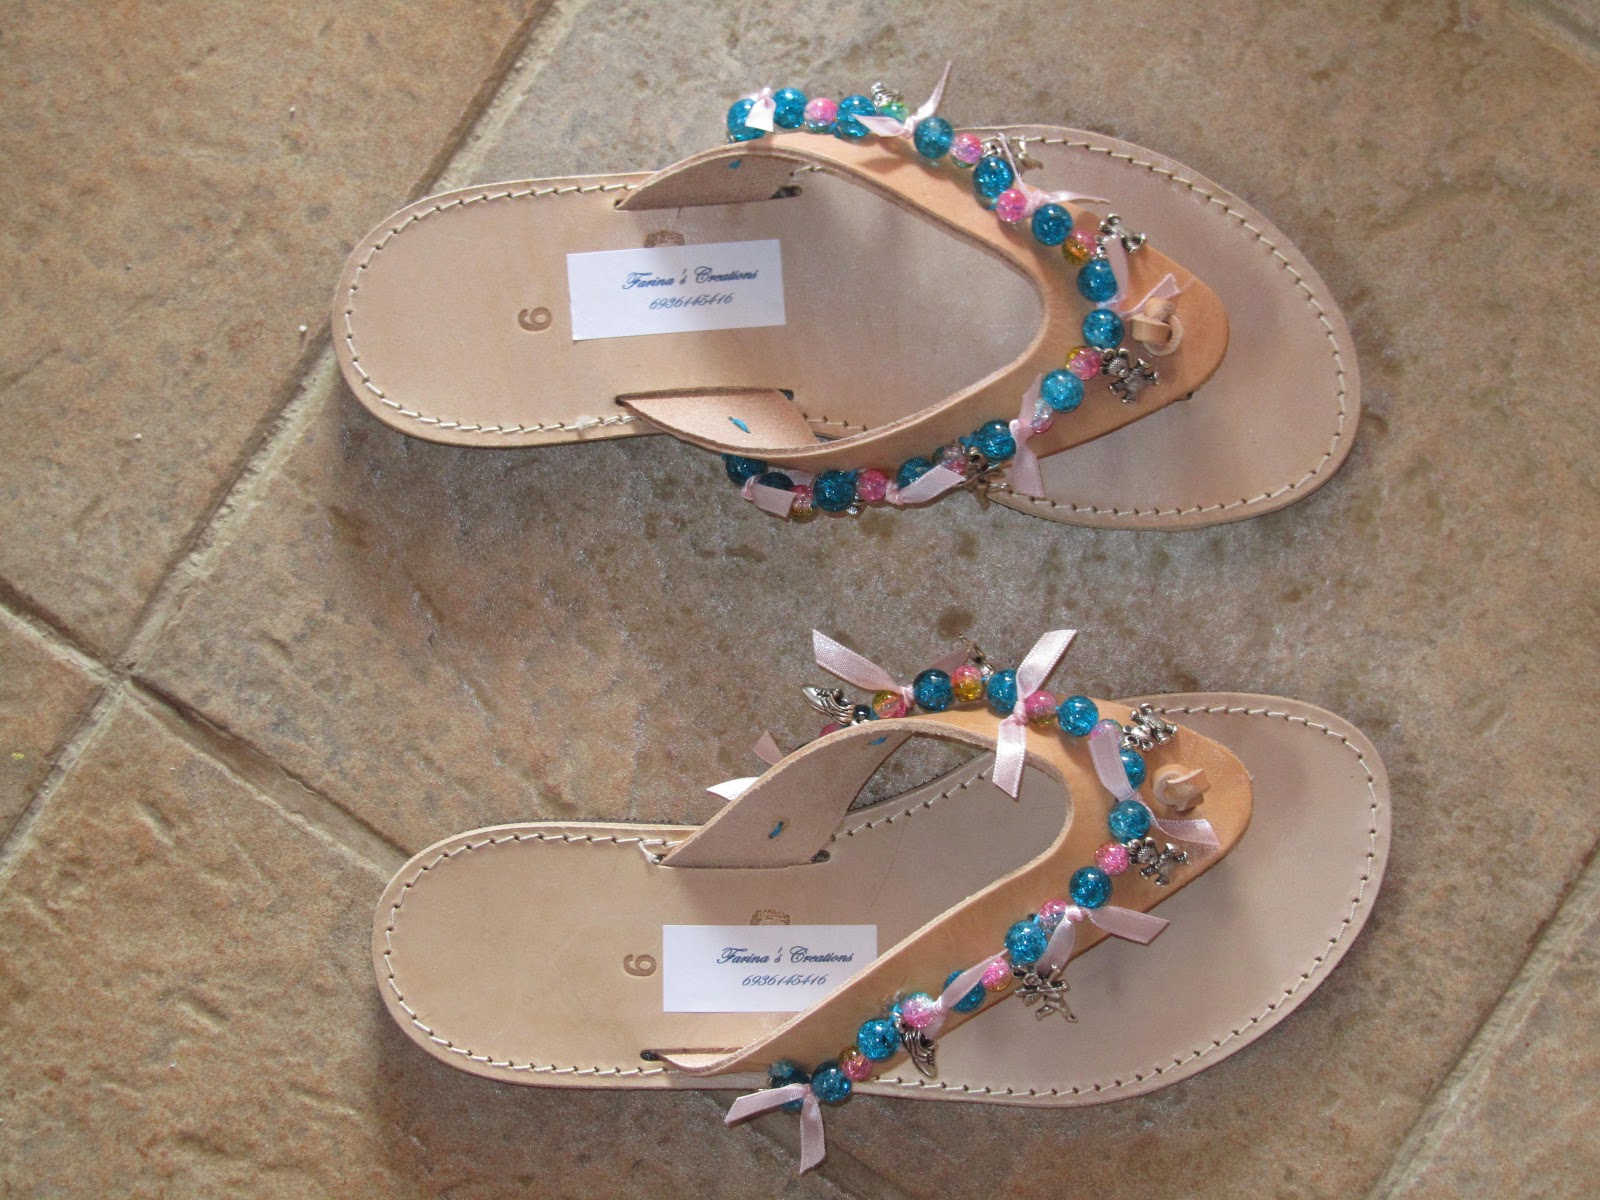 Farina's Creations: Hand decorated sandals